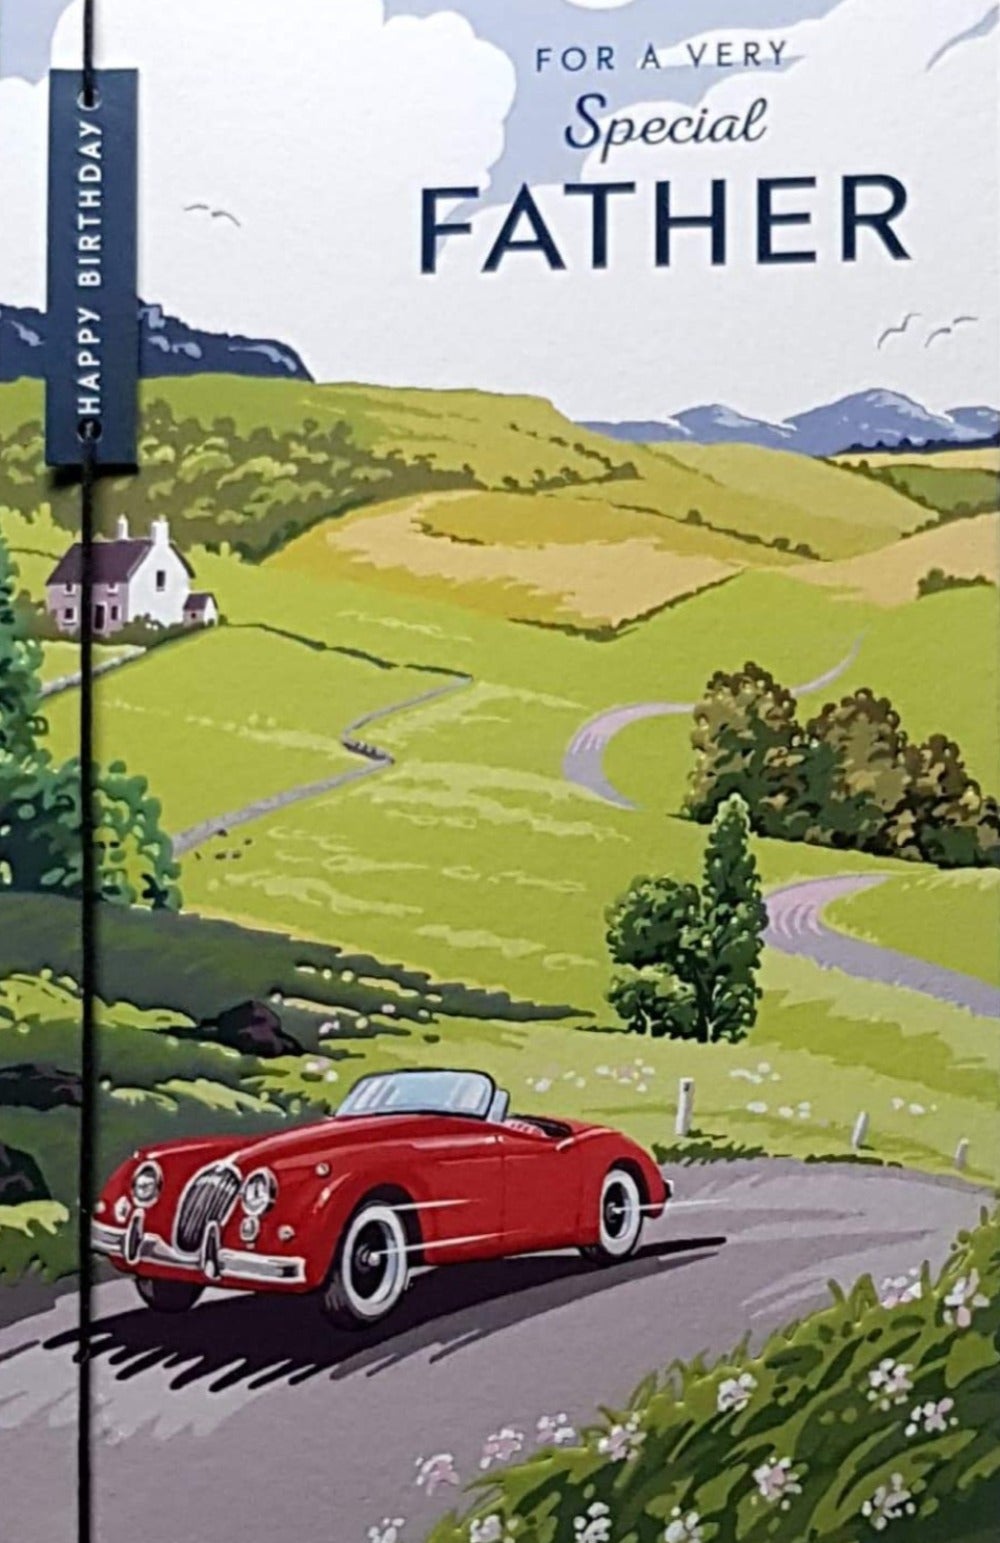 Birthday Card - Dad / A Car Driving In A Green Landscape